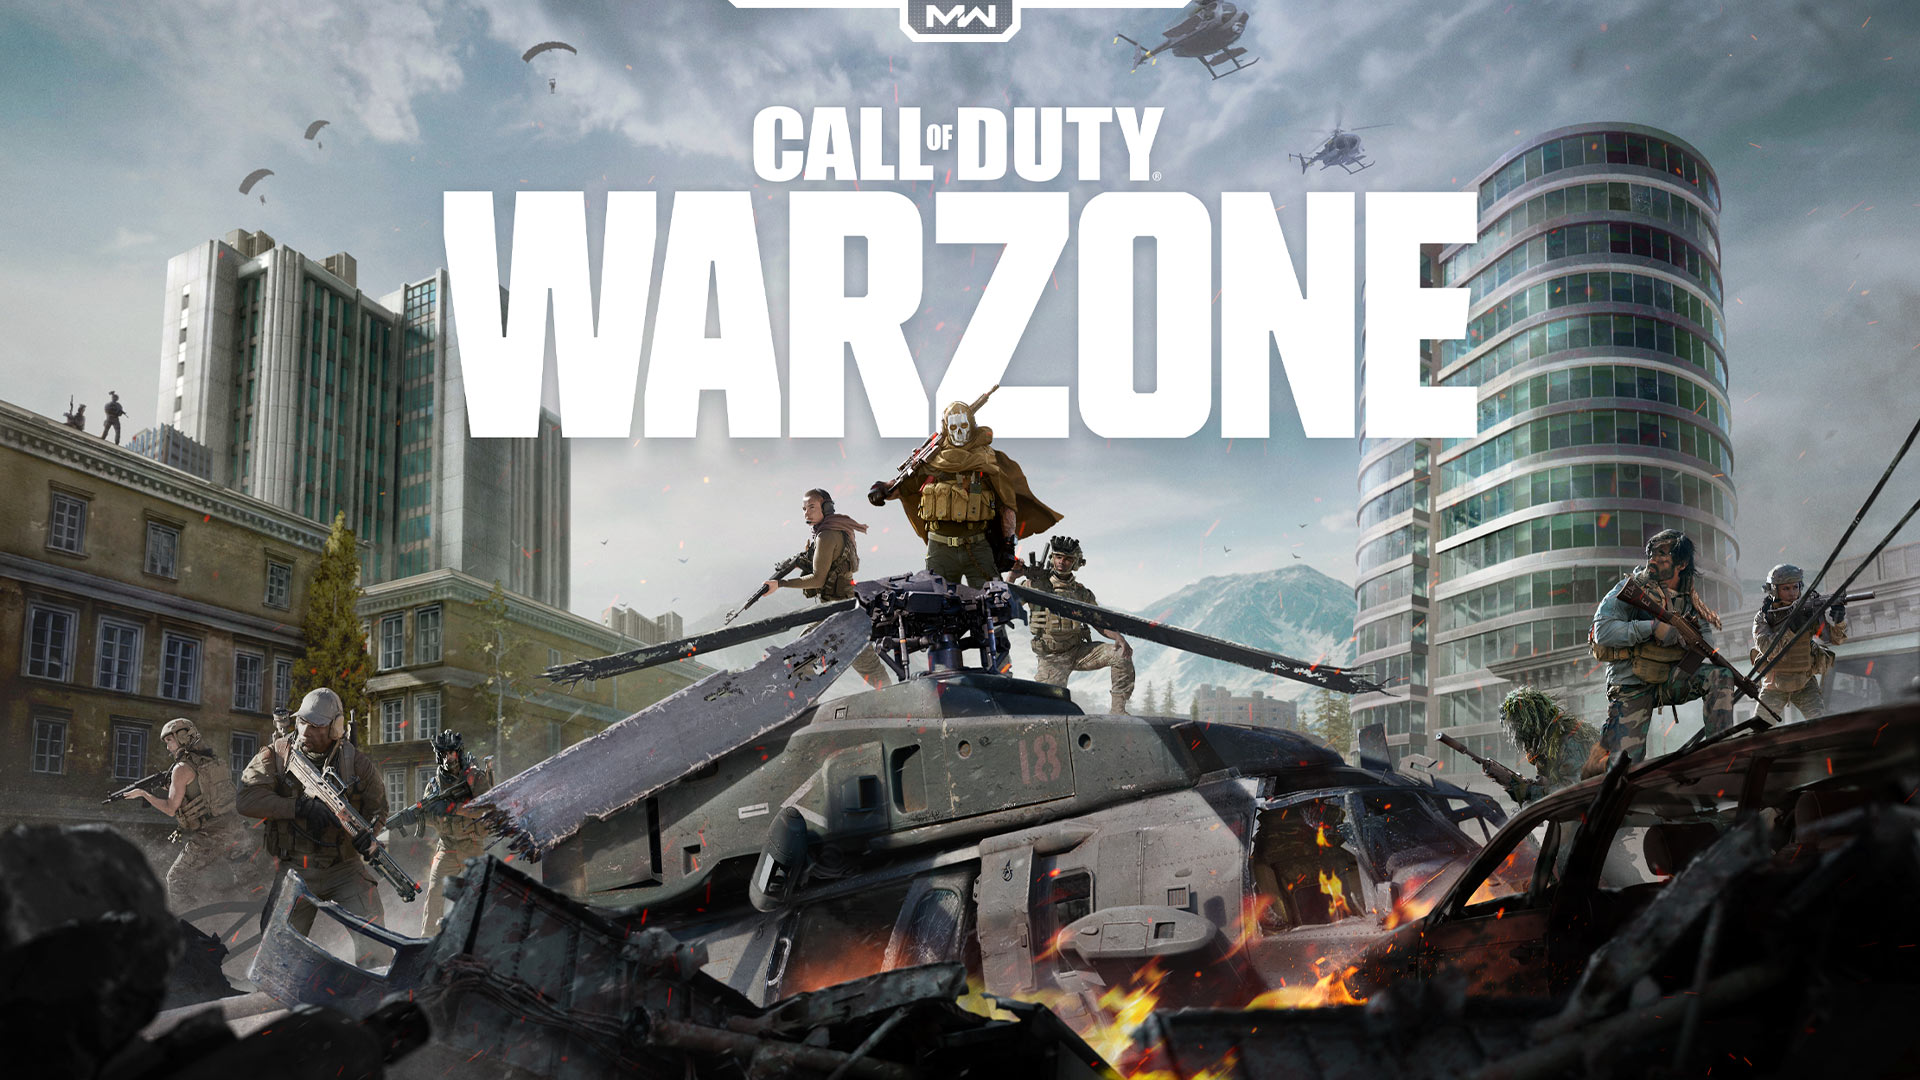 warzone, loadouts, Call of Duty